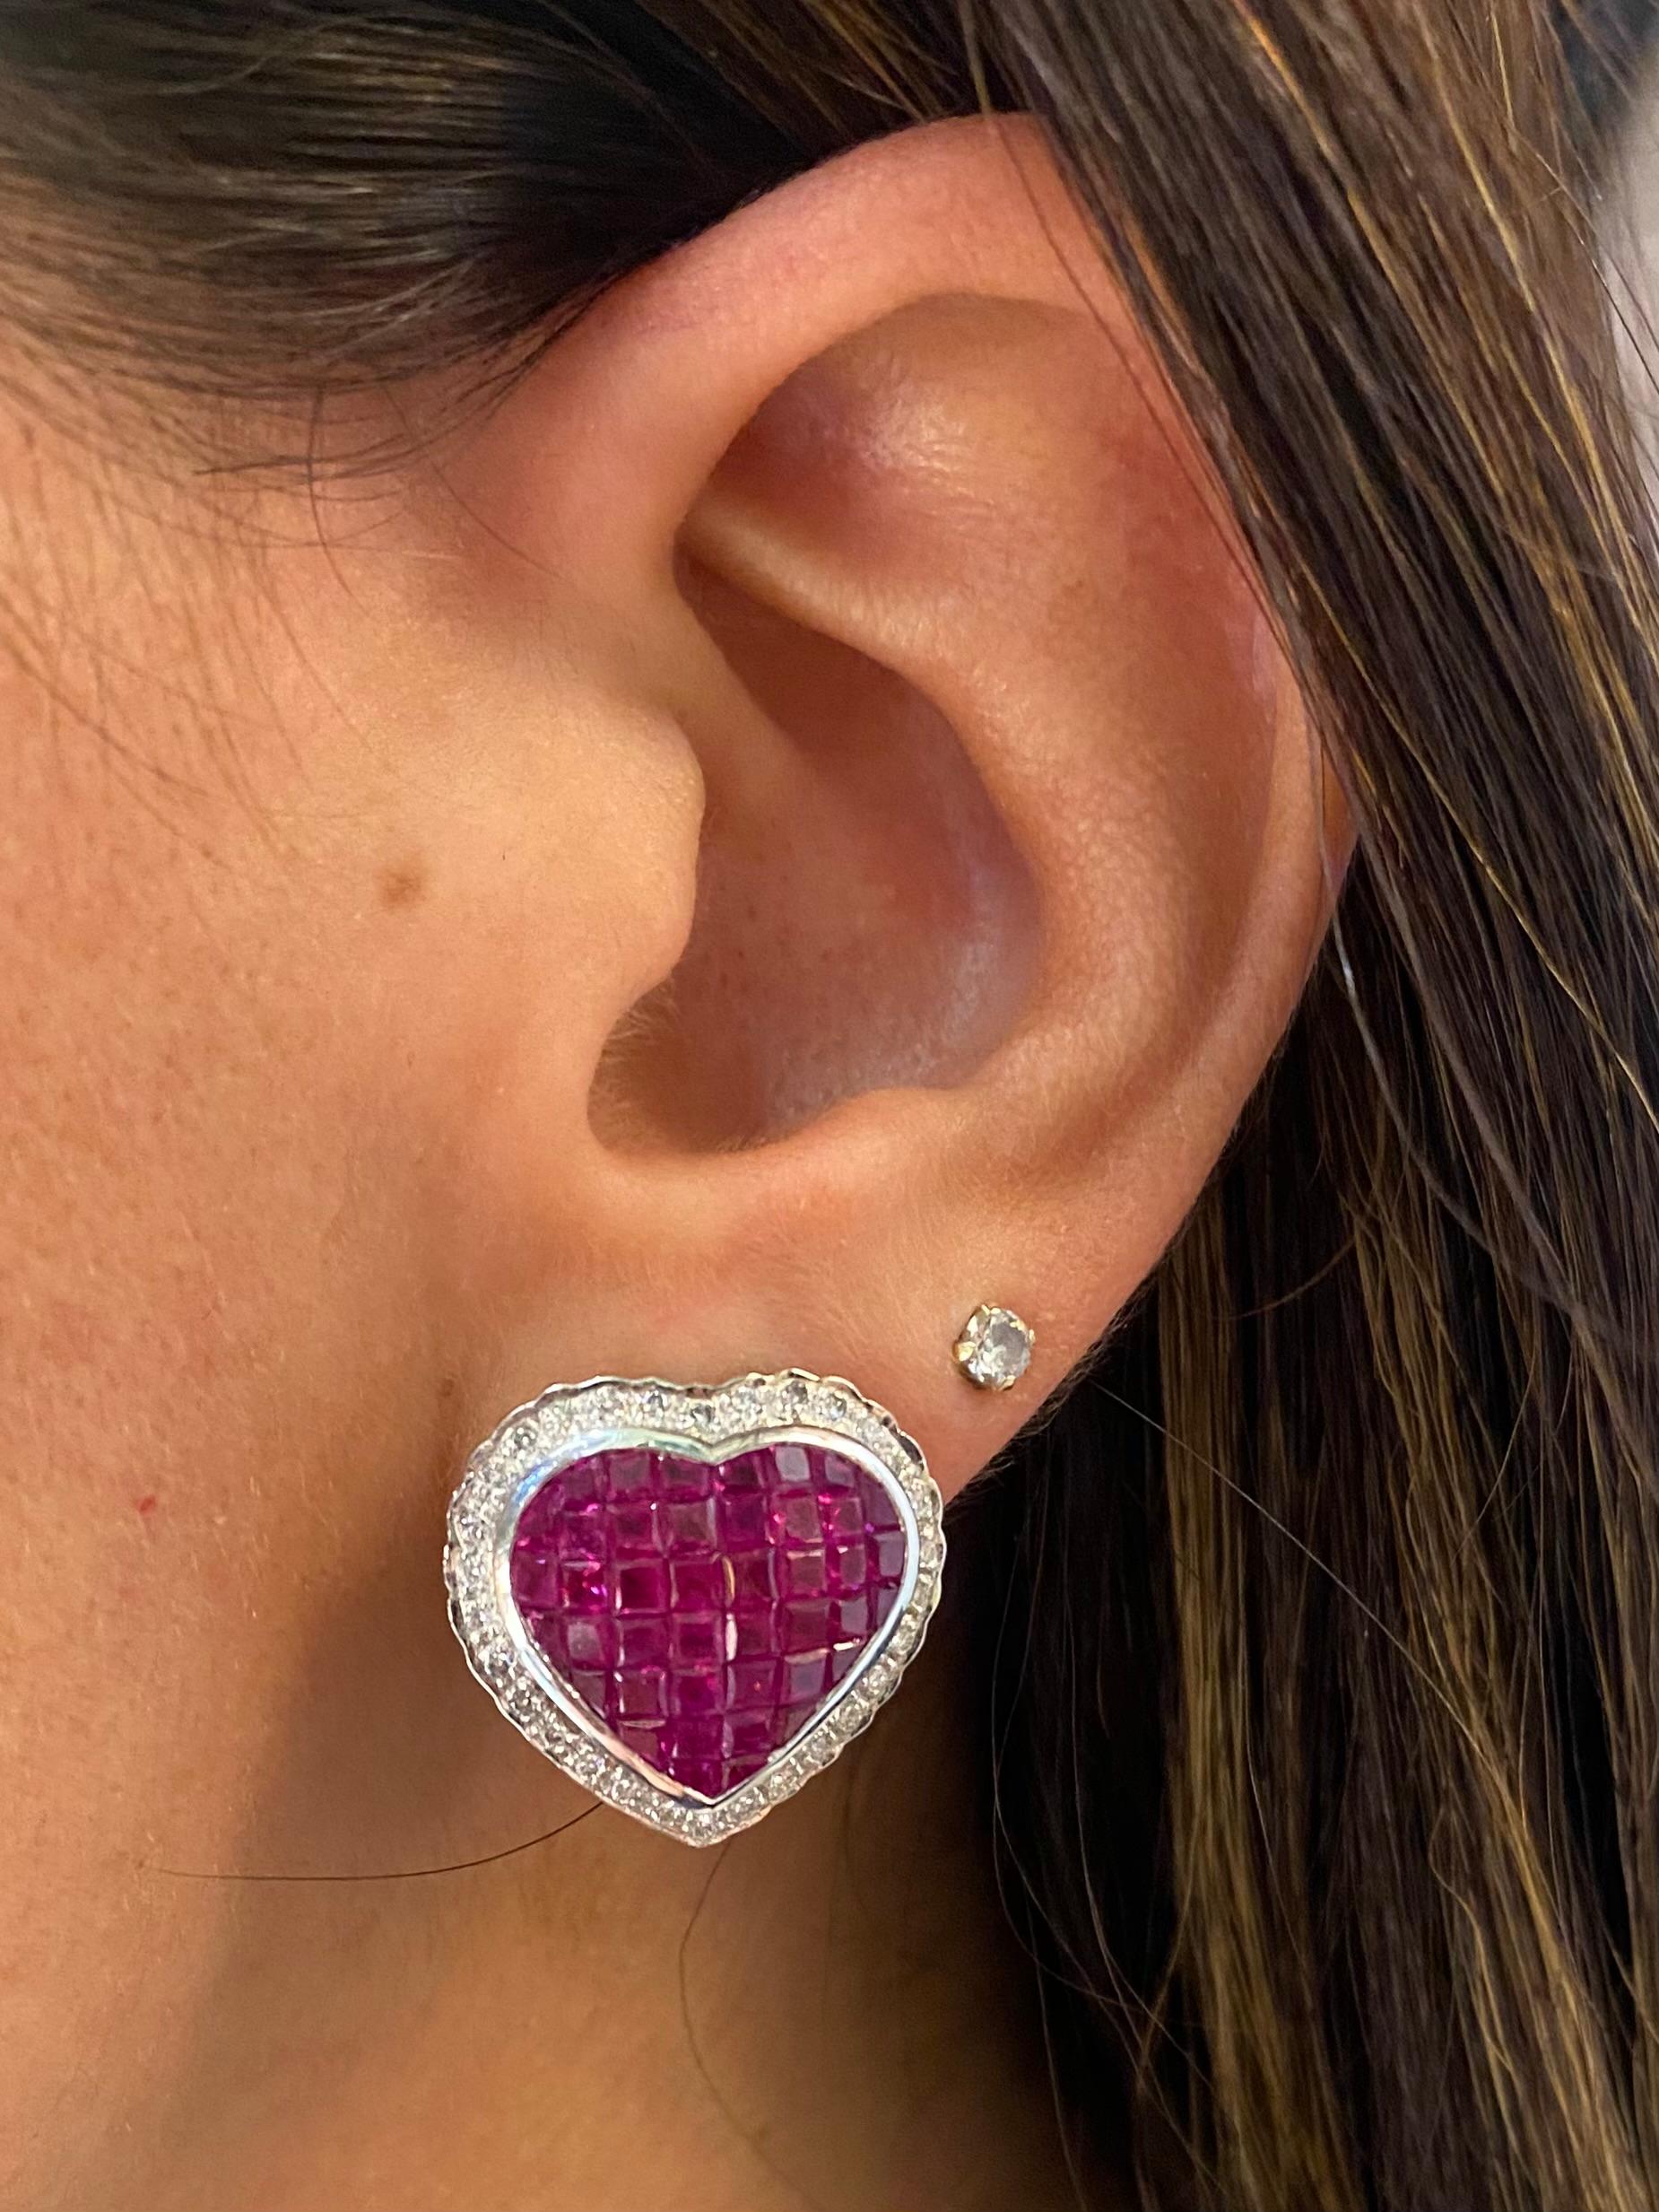 Mystery Set Ruby & Diamond Heart Earrings

A pair of 18 karat white gold heart shaped earrings set with 84 square cut rubies and 60 round cut diamonds

Stamped 750

Measurements: 0.75